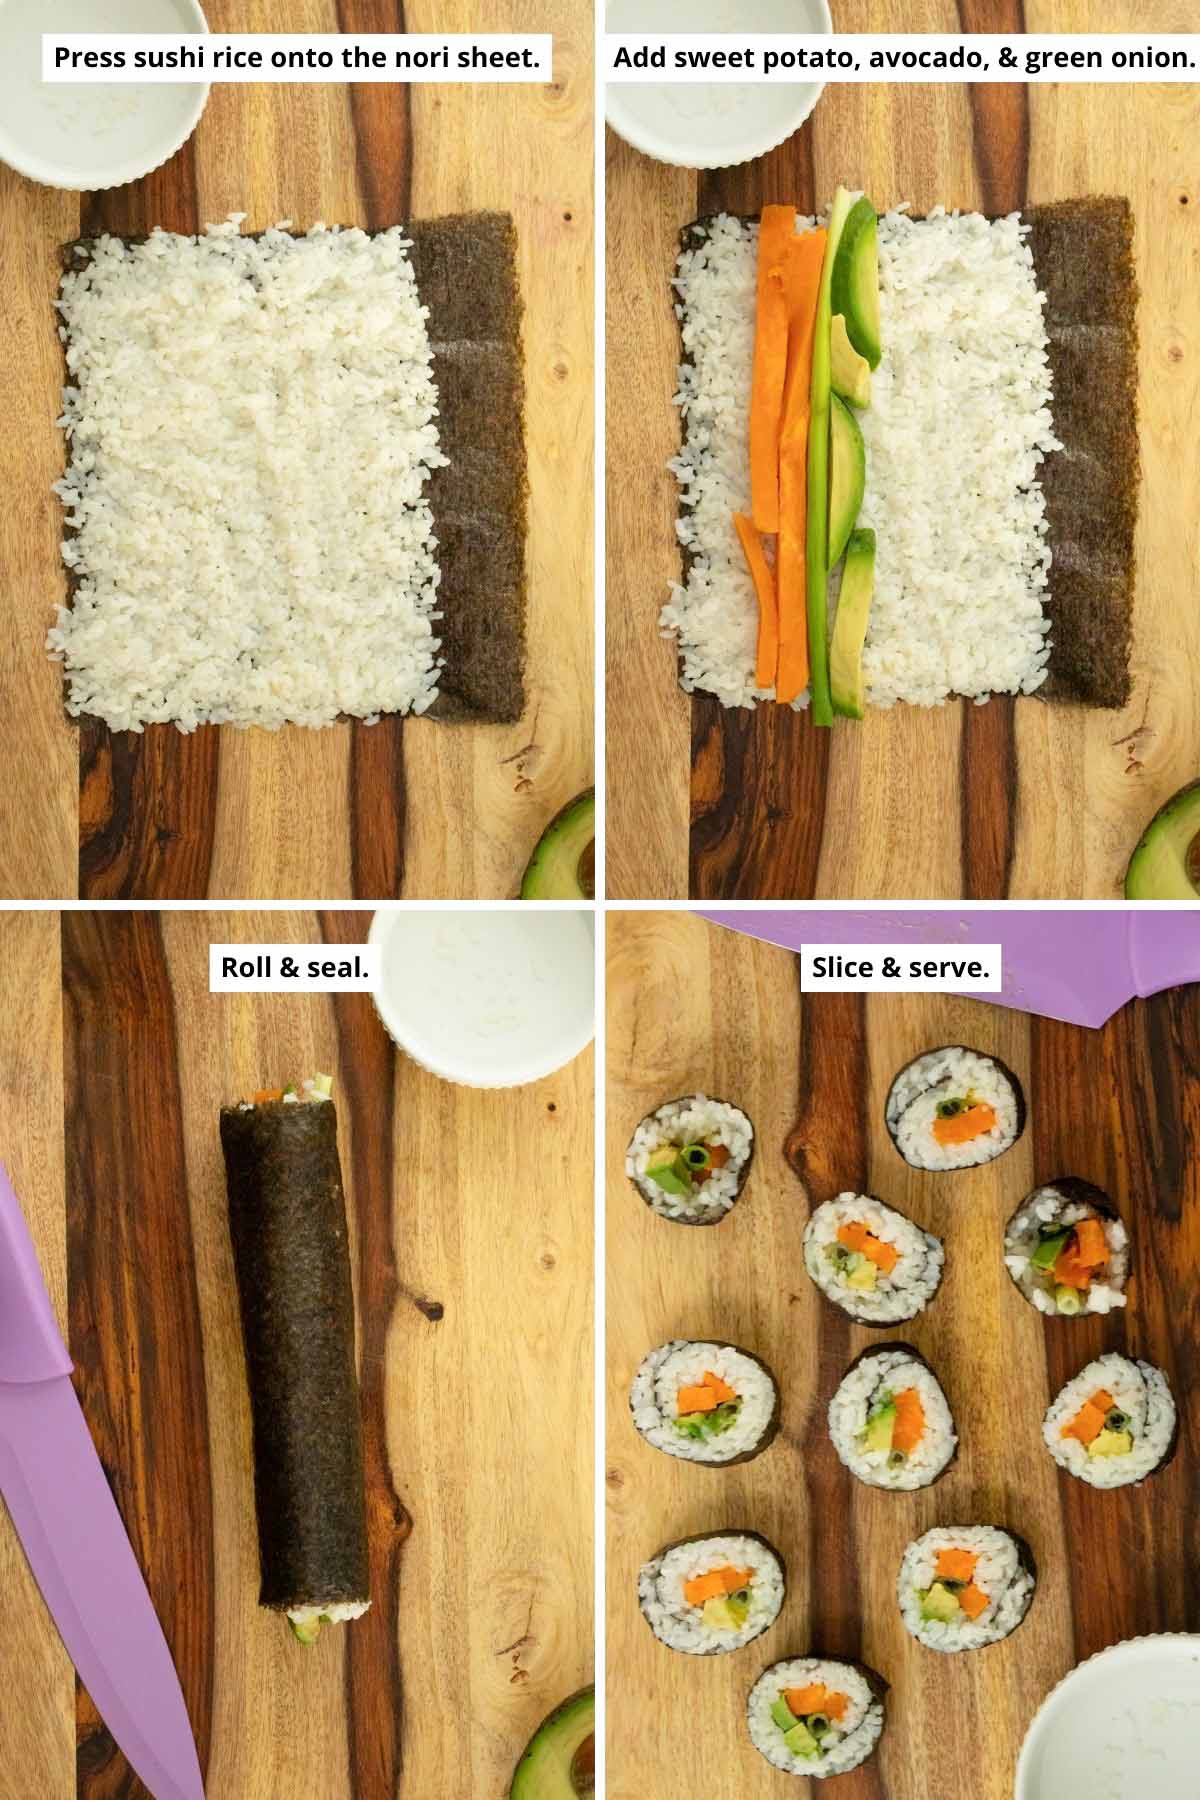 image collage showing the rice pressed onto a nori sheet, adding the sweet potato and other fillings, the rolled sushi before slicing, and the sliced sushi on the cutting board